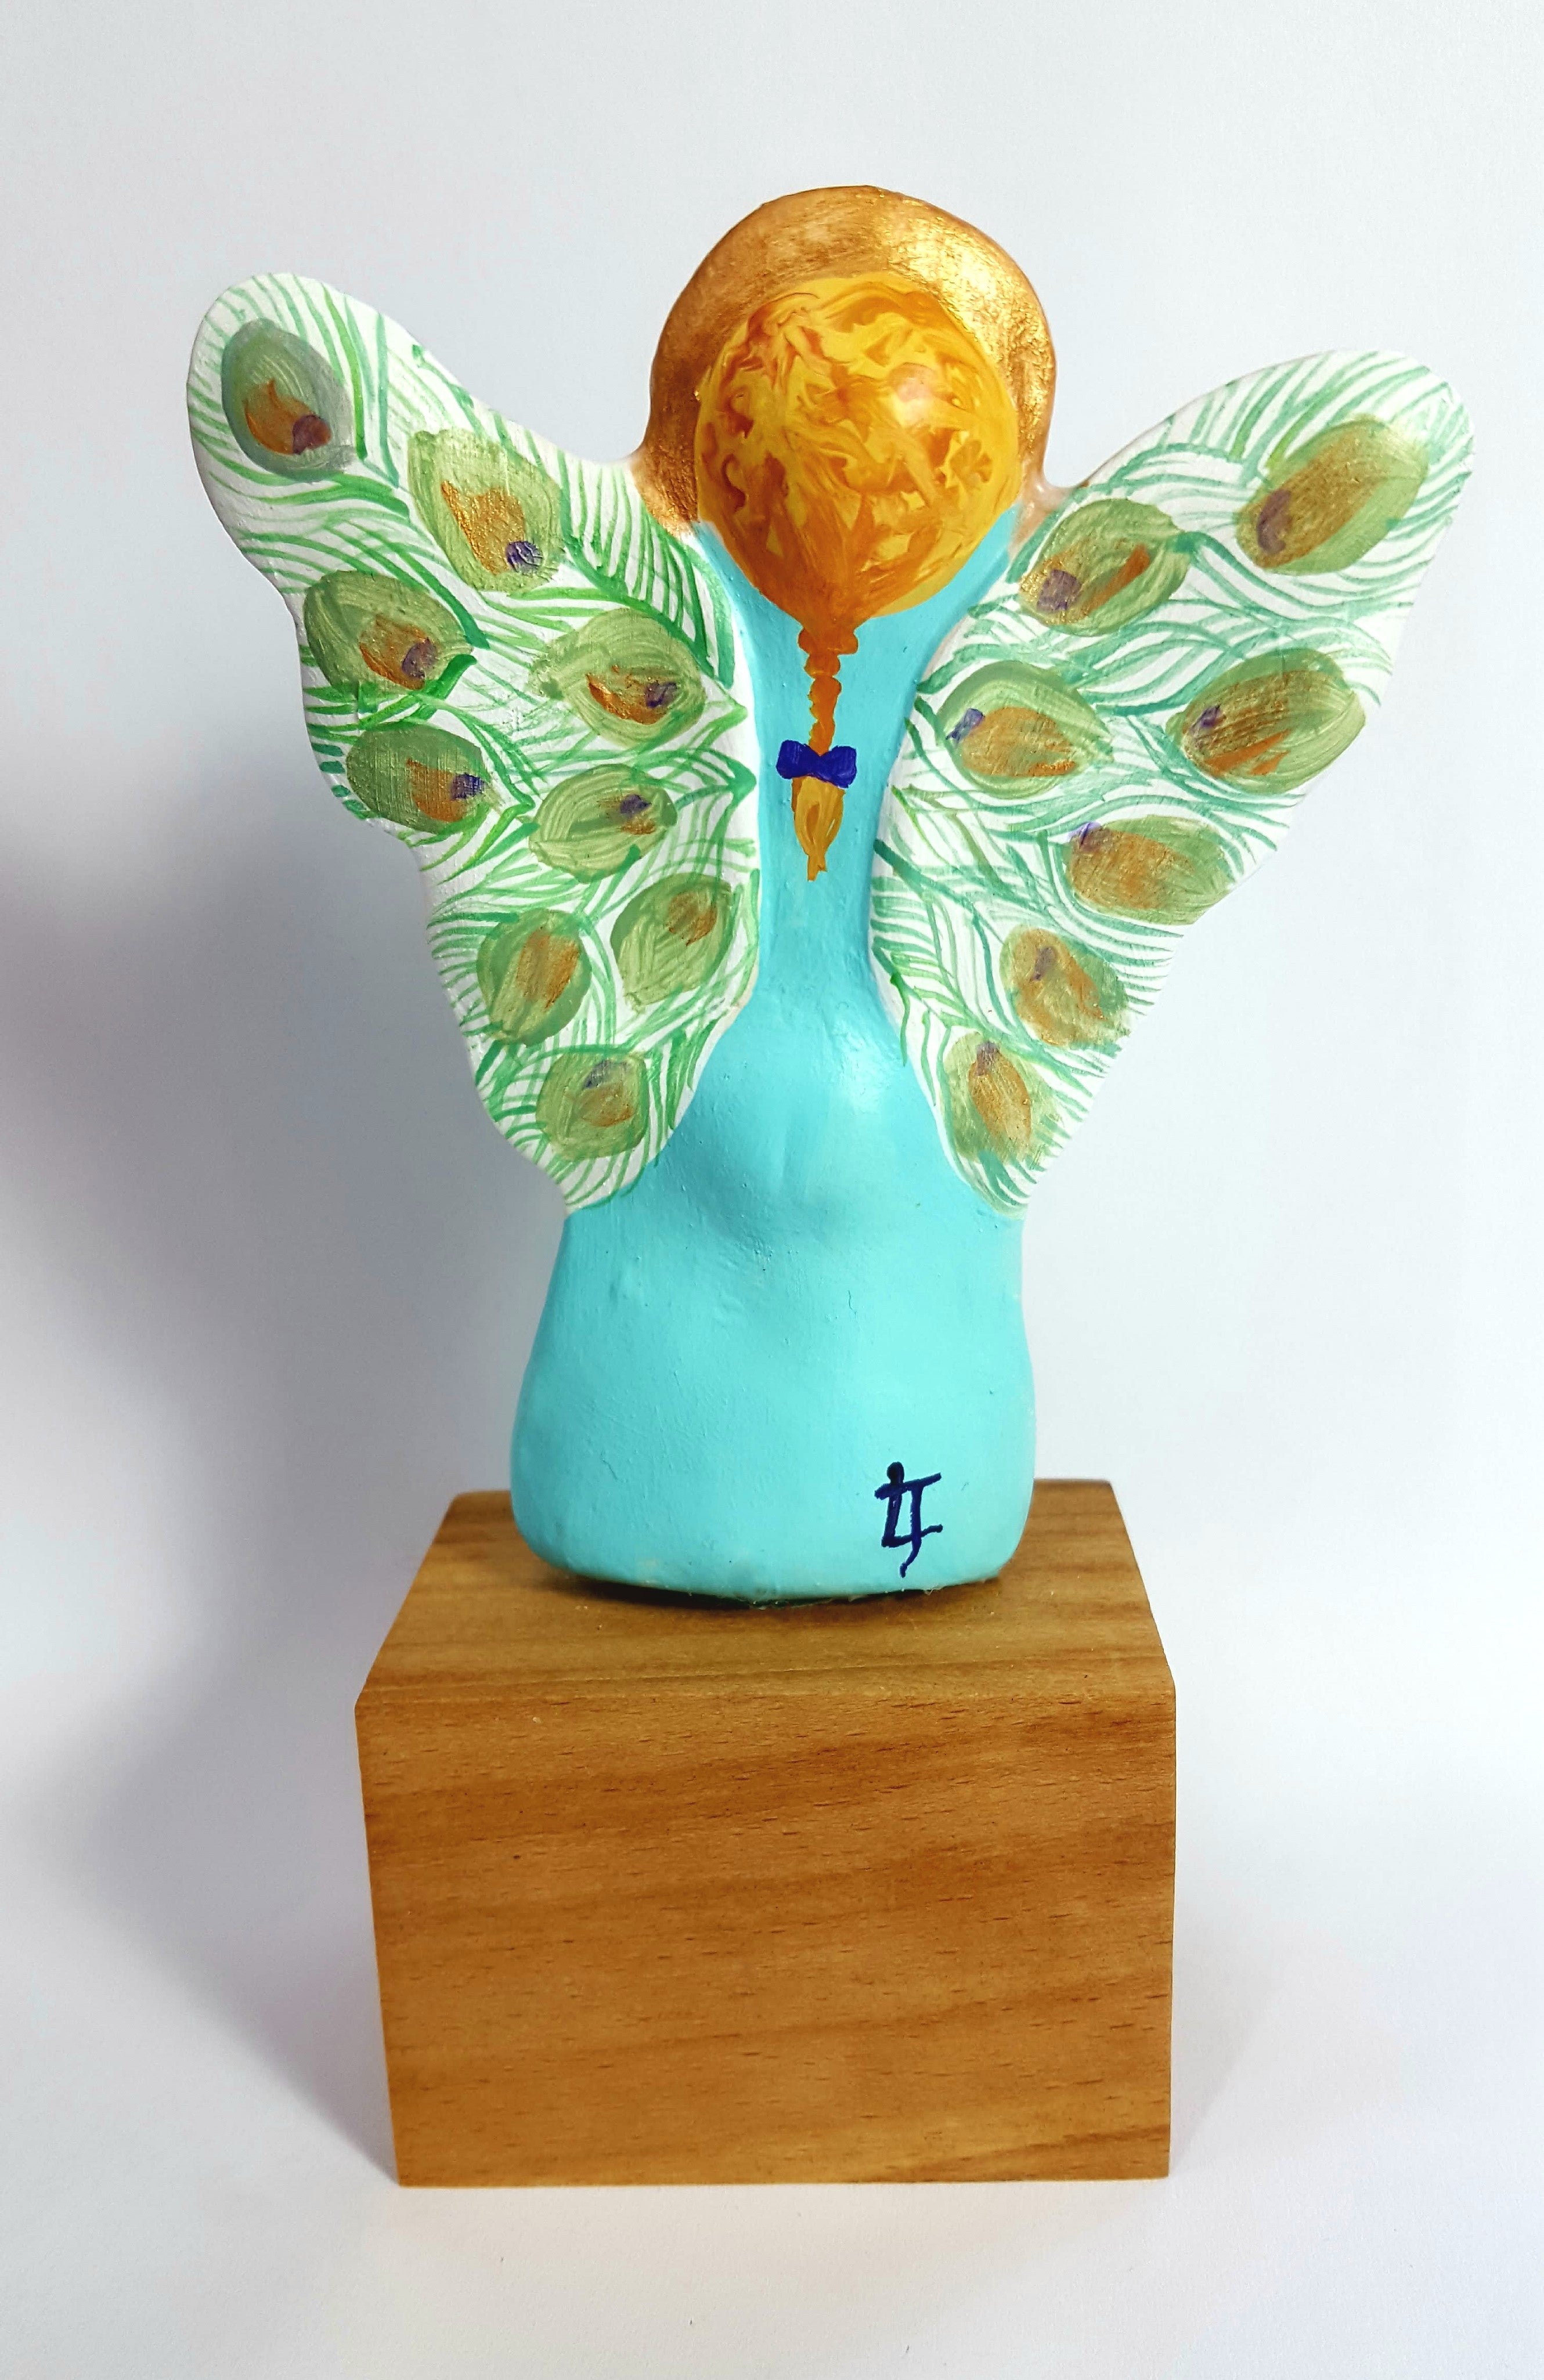 Guardian Angel - Goddess - Faye – Fairy – Peri With Peacock Wings Sculpture 2